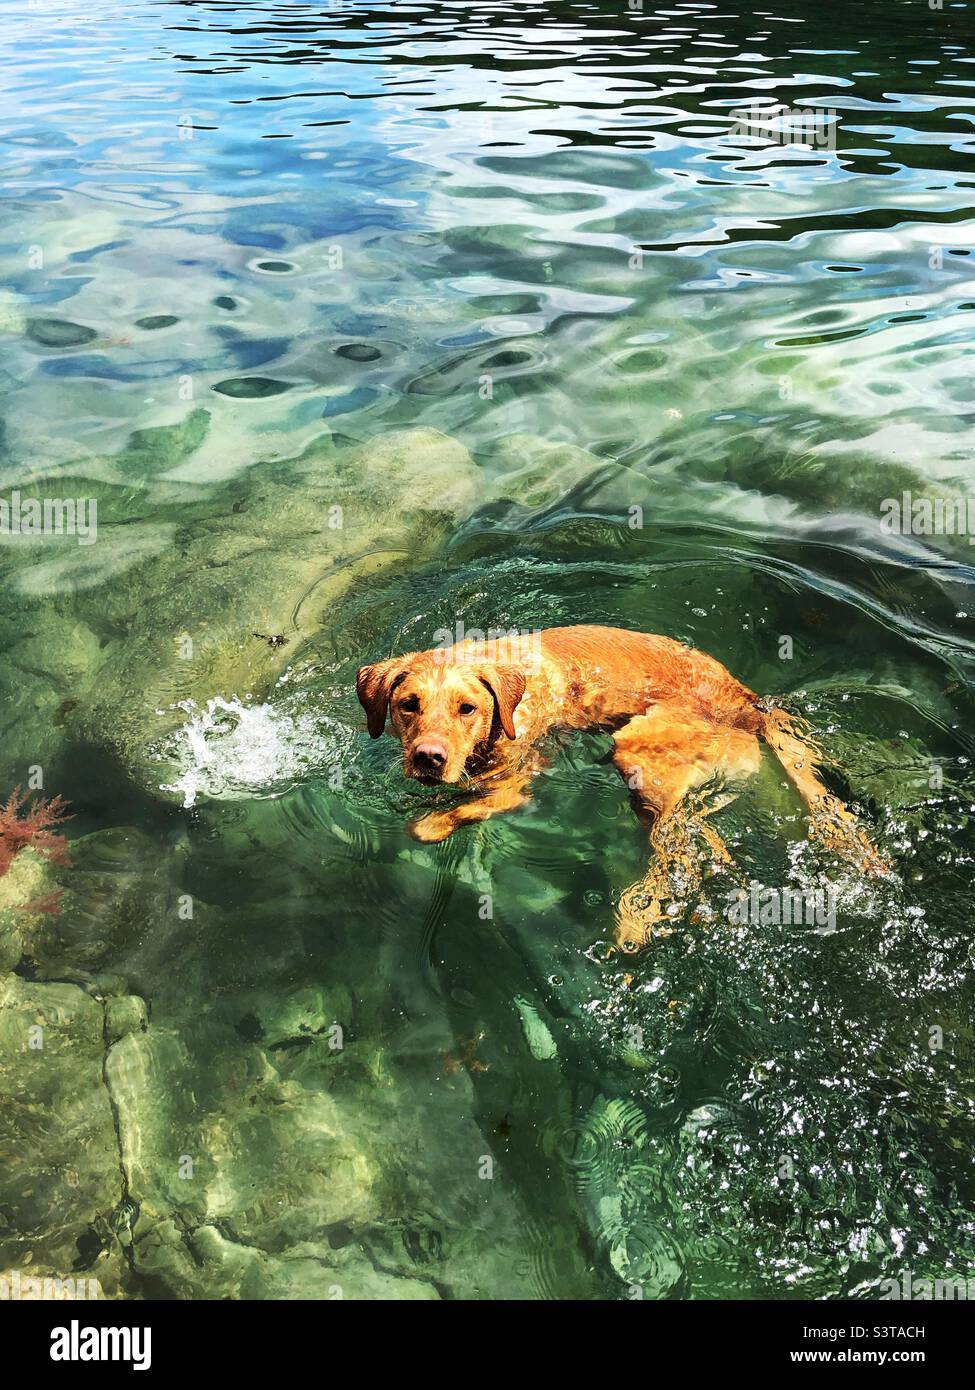 Aerial view of pet Labrador dog swimming in clear water Stock Photo